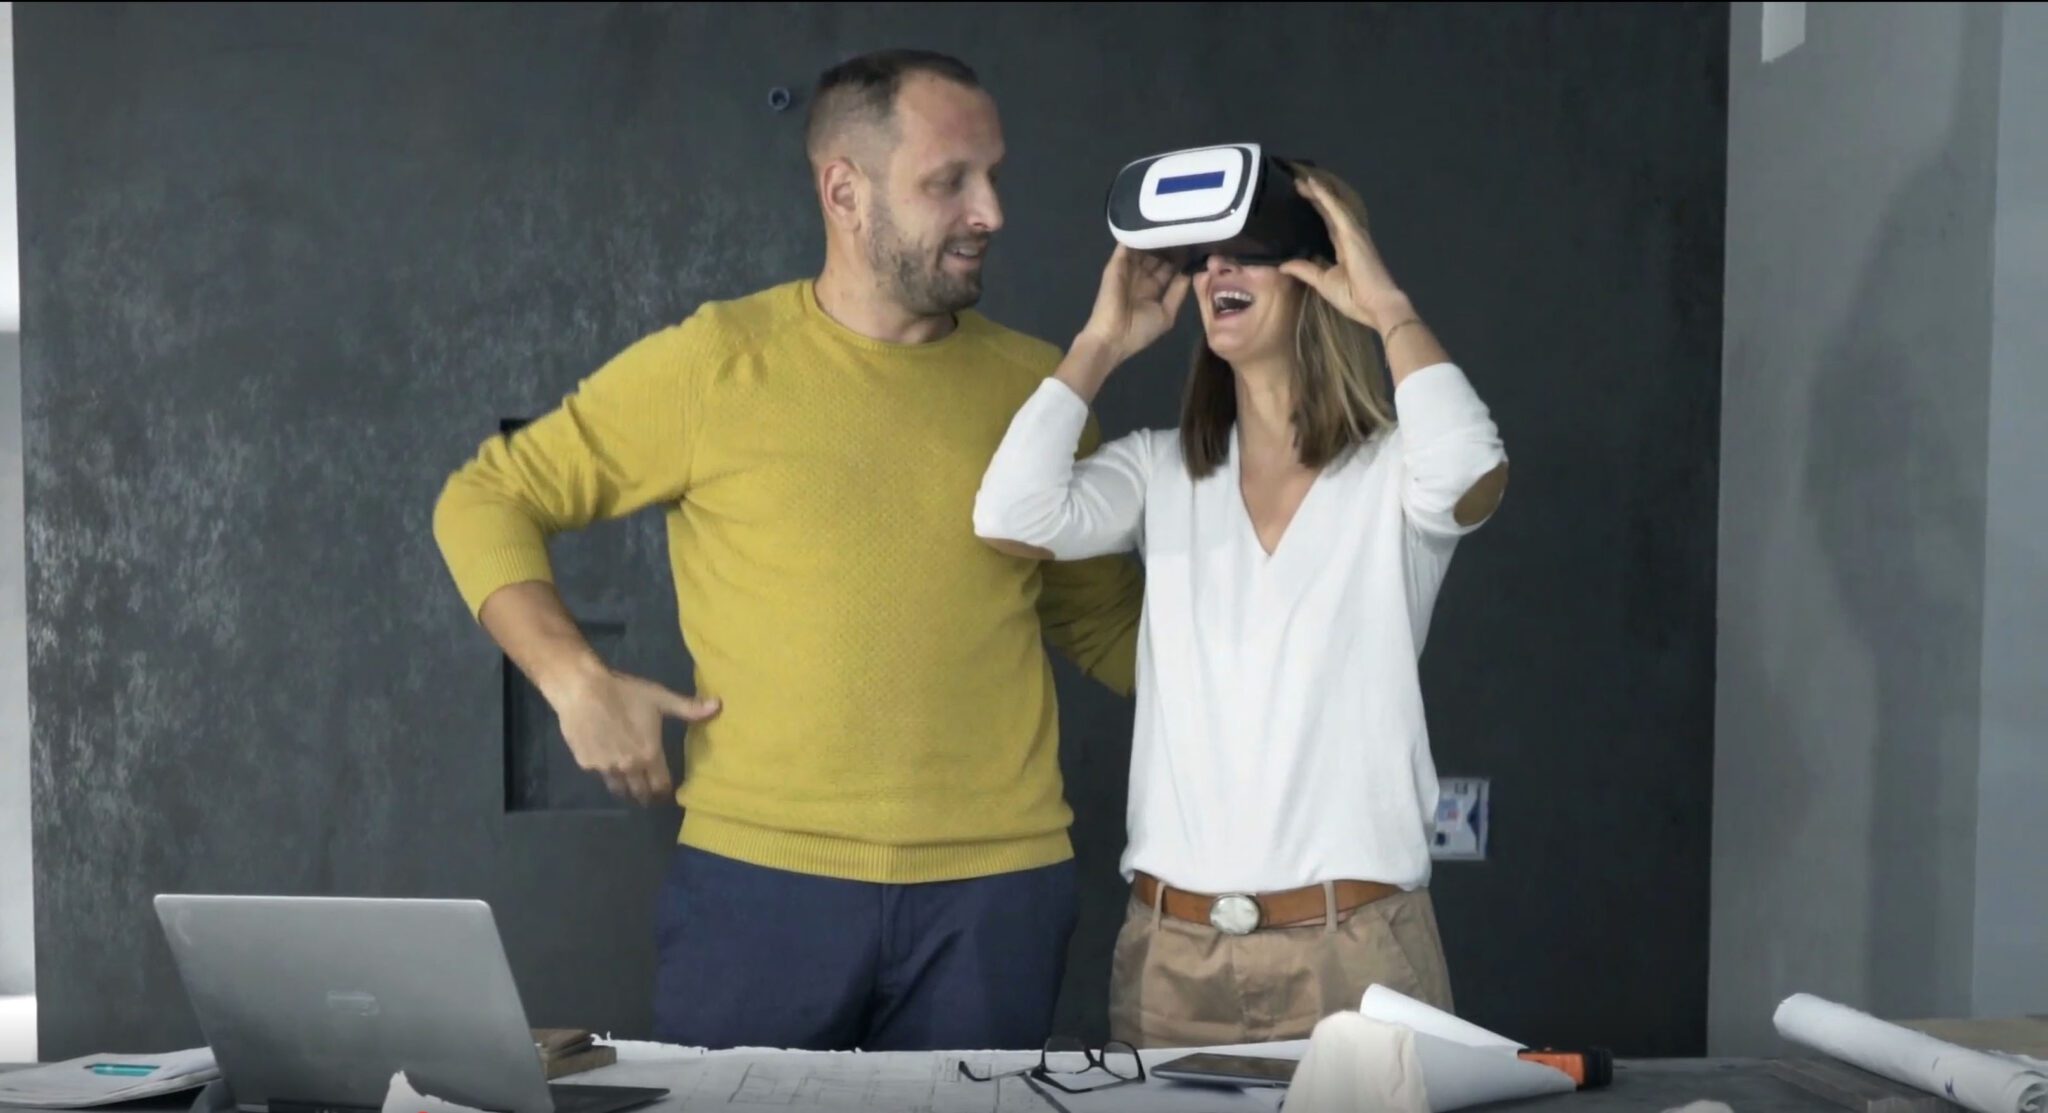 Homeowners using VR to view home design.